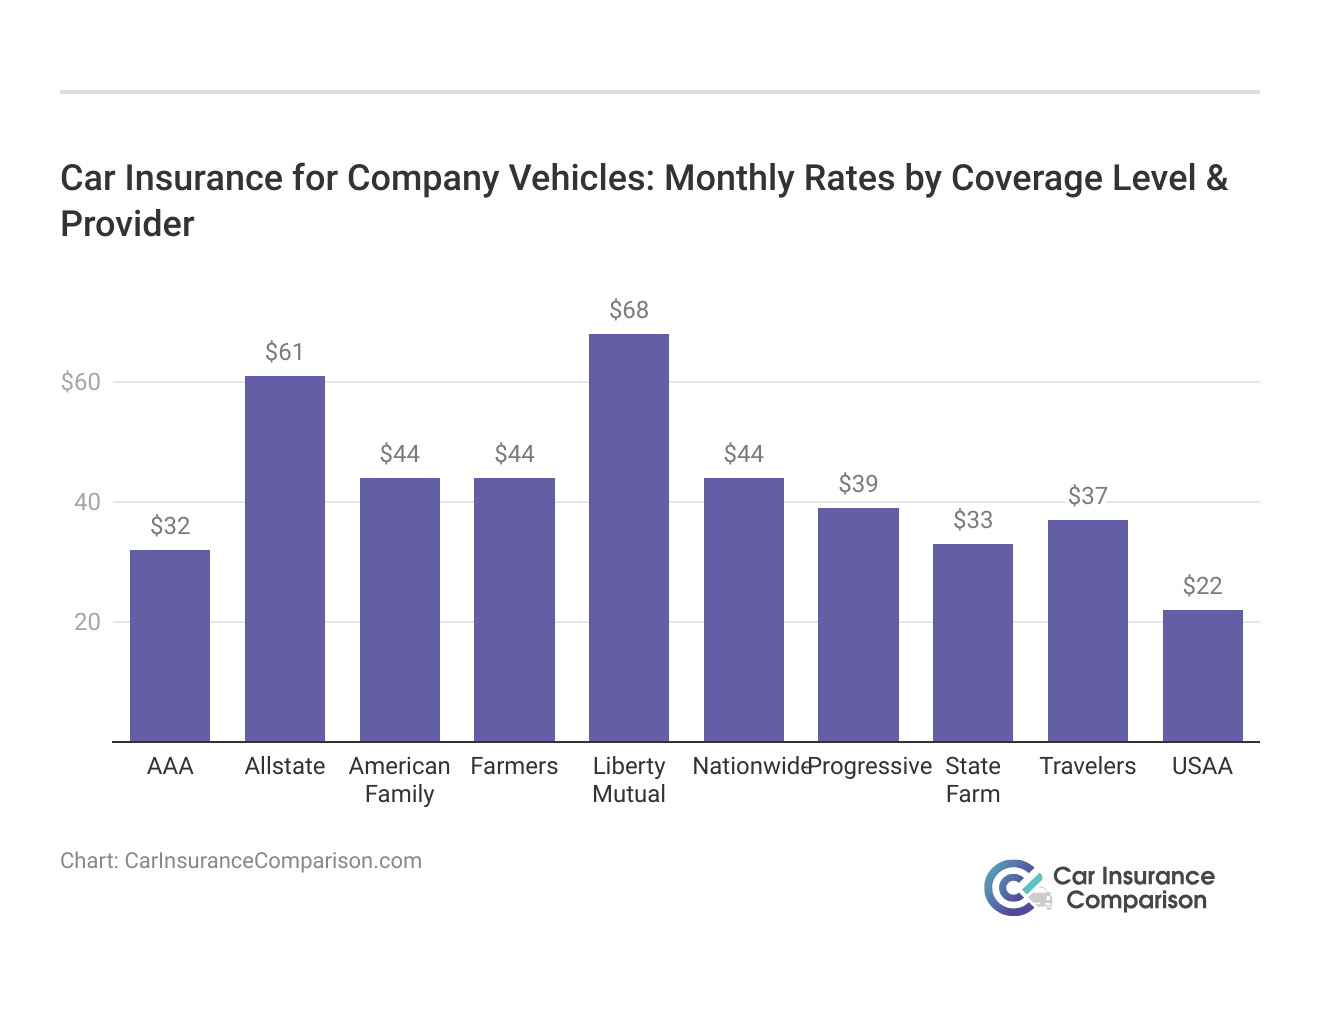 <h3>Car Insurance for Company Vehicles: Monthly Rates by Coverage Level & Provider</h3>